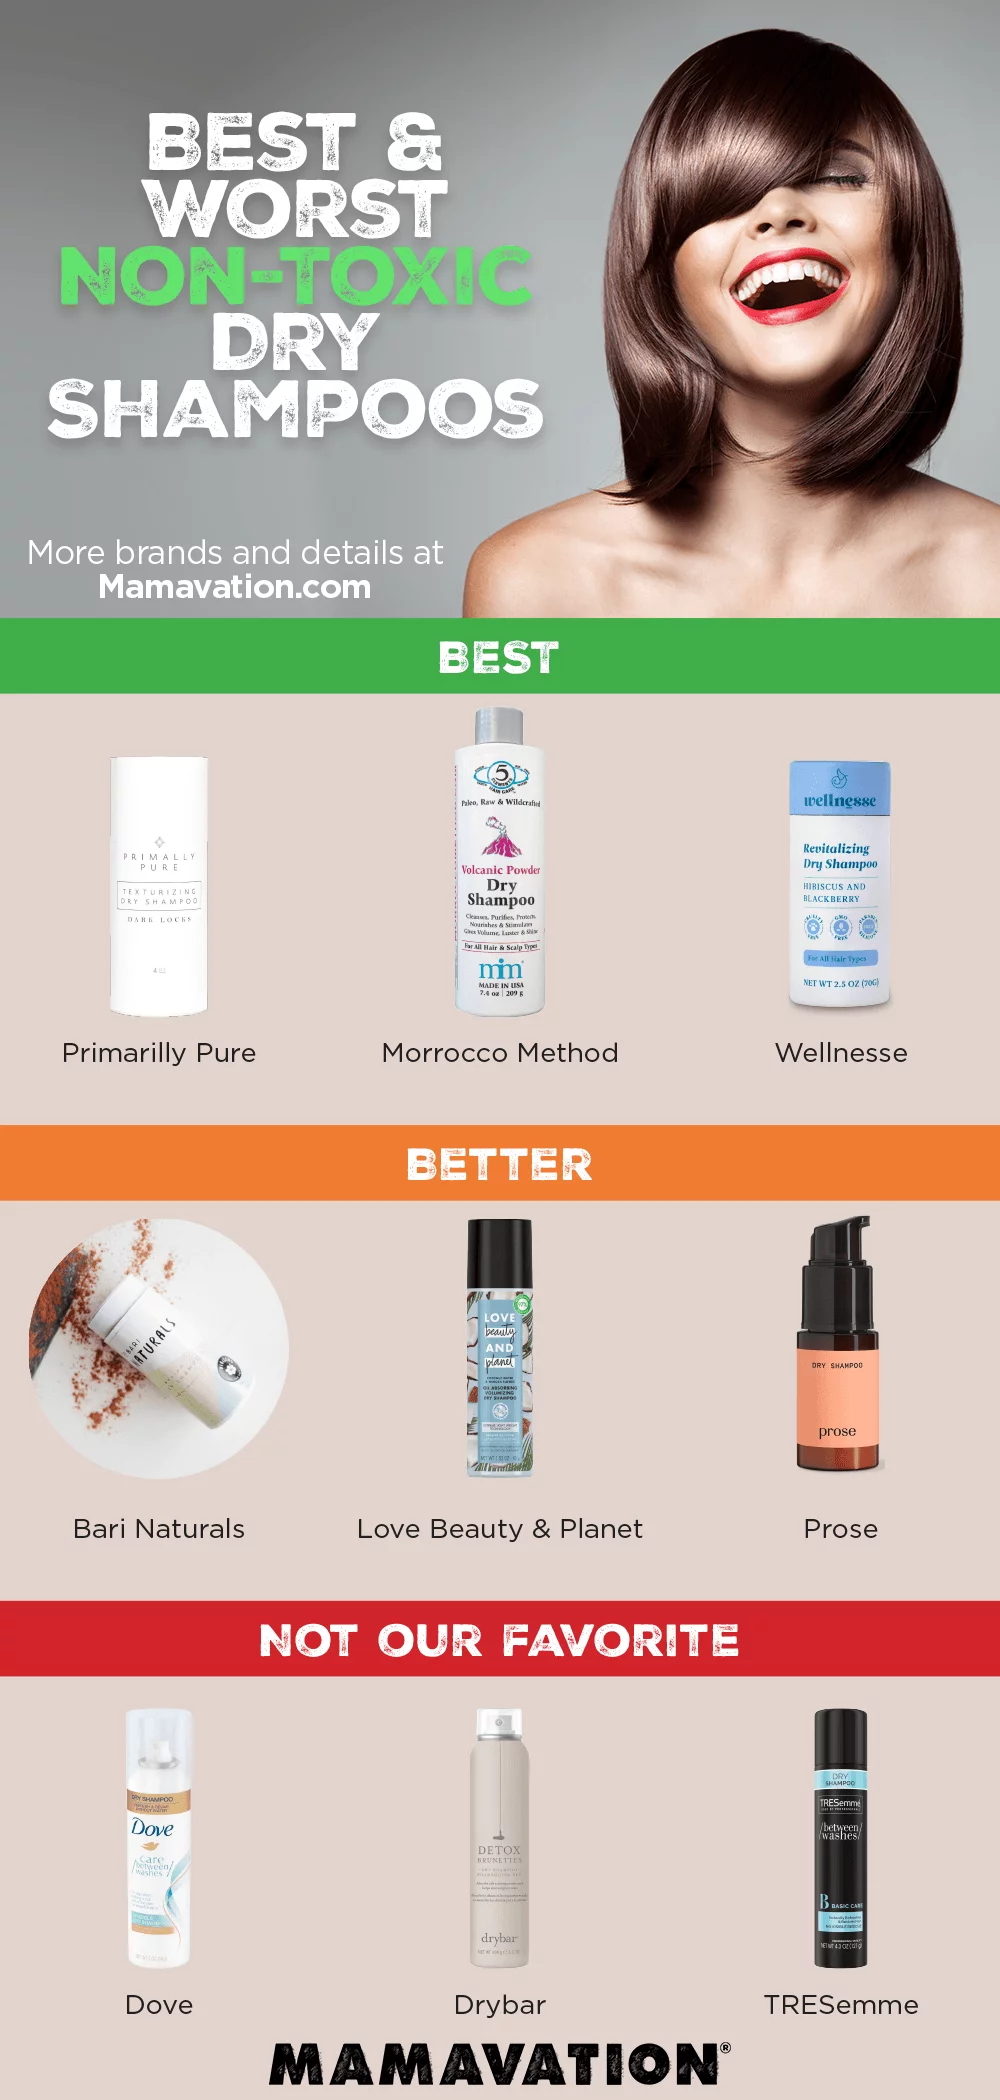 Best & Worst Non-Toxic Dry Shampoos 2021